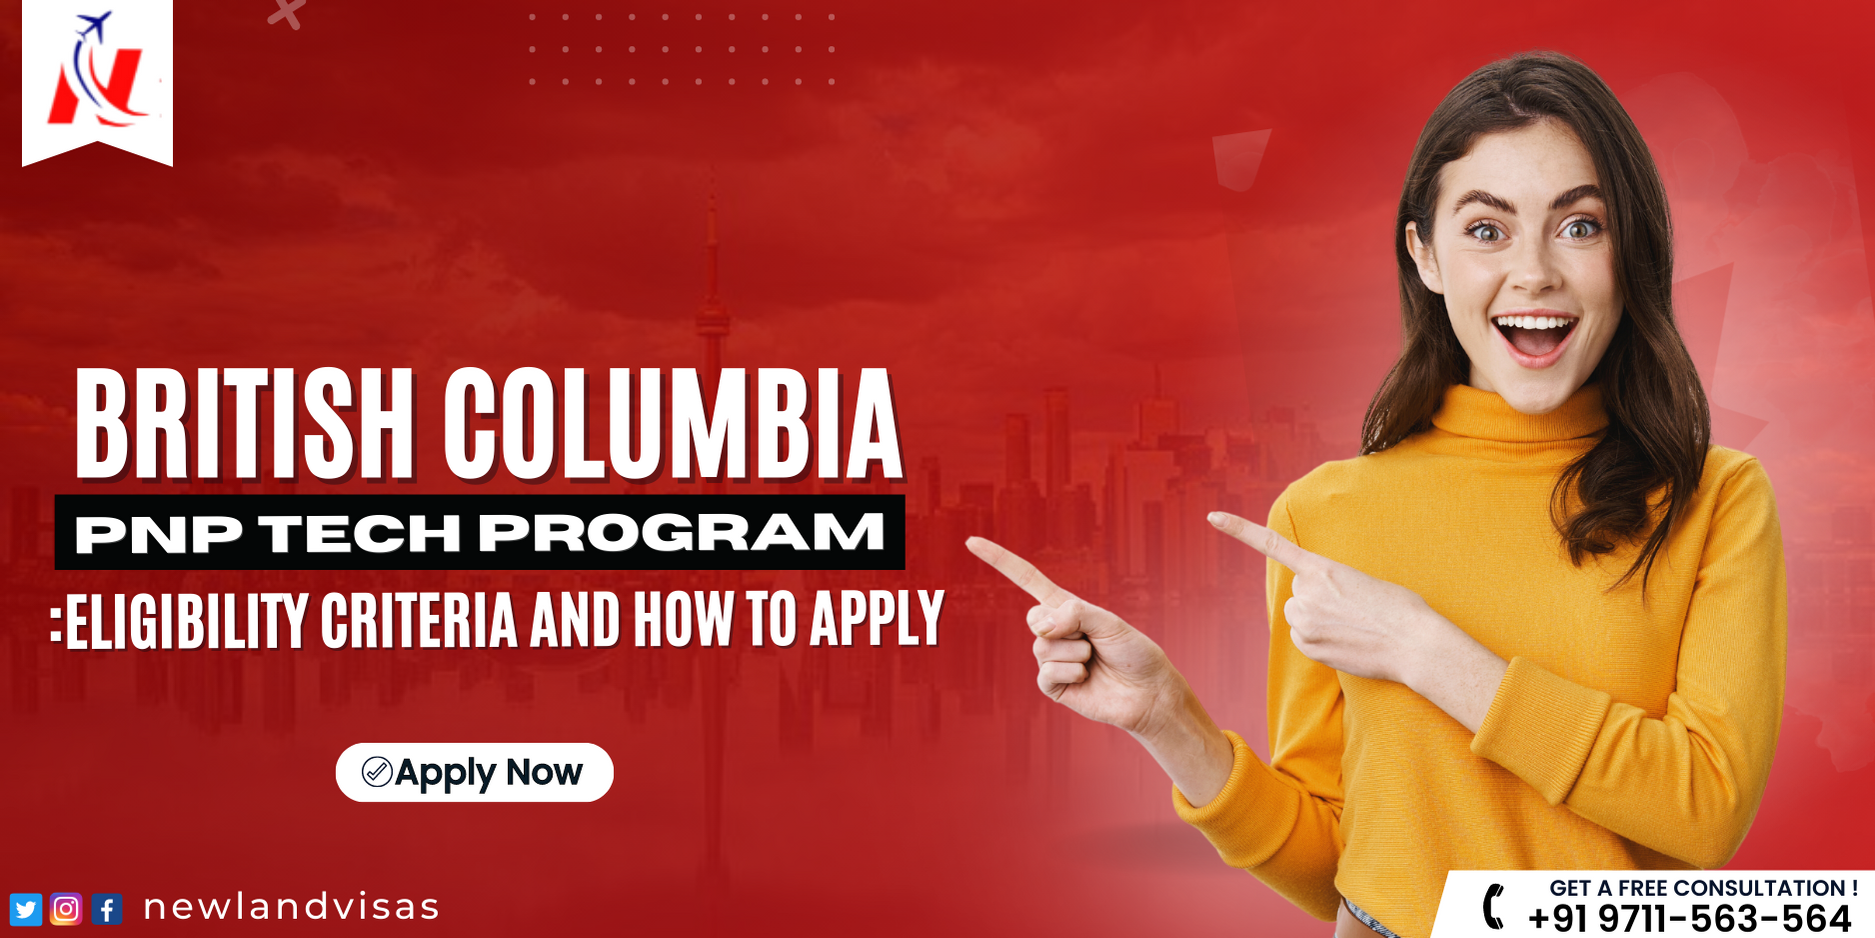 British Columbia PNP tech program: Eligibility criteria and how to apply